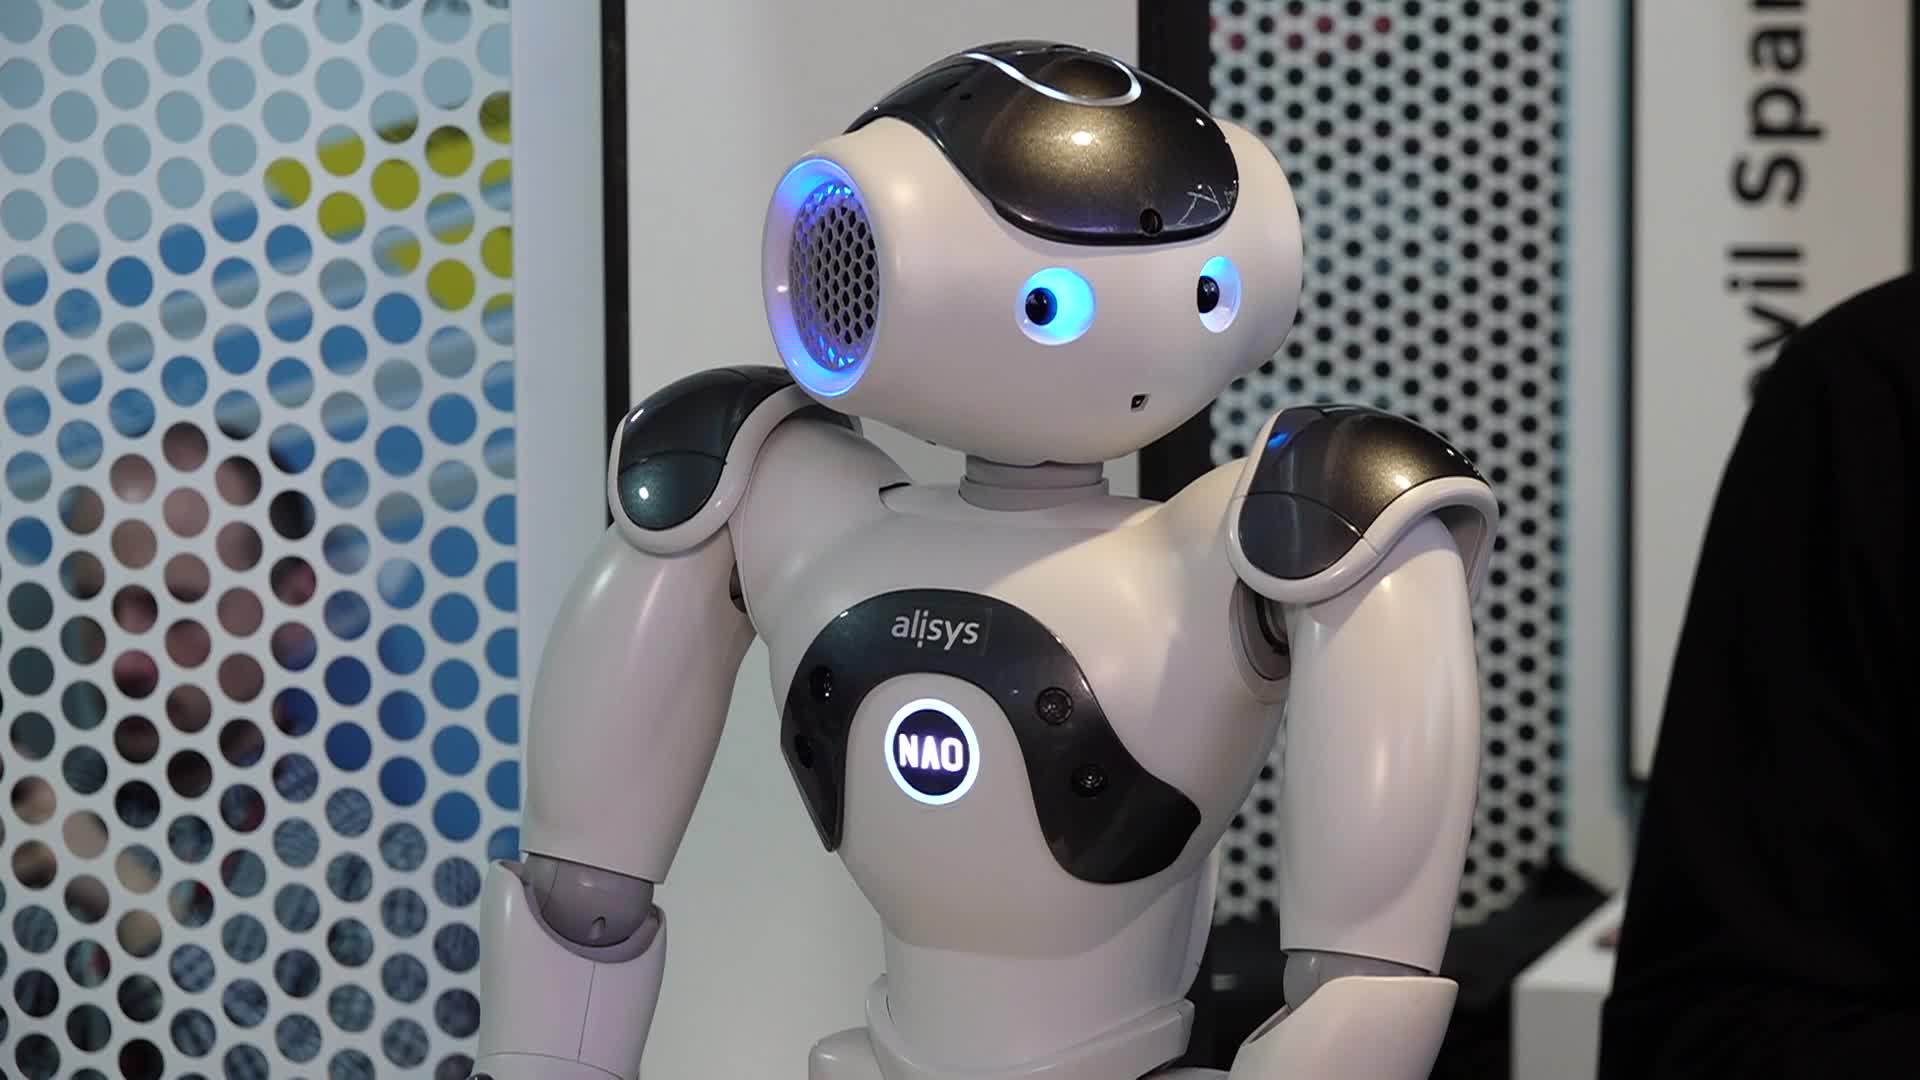 Robots Interact With Human At Mobile World Congress